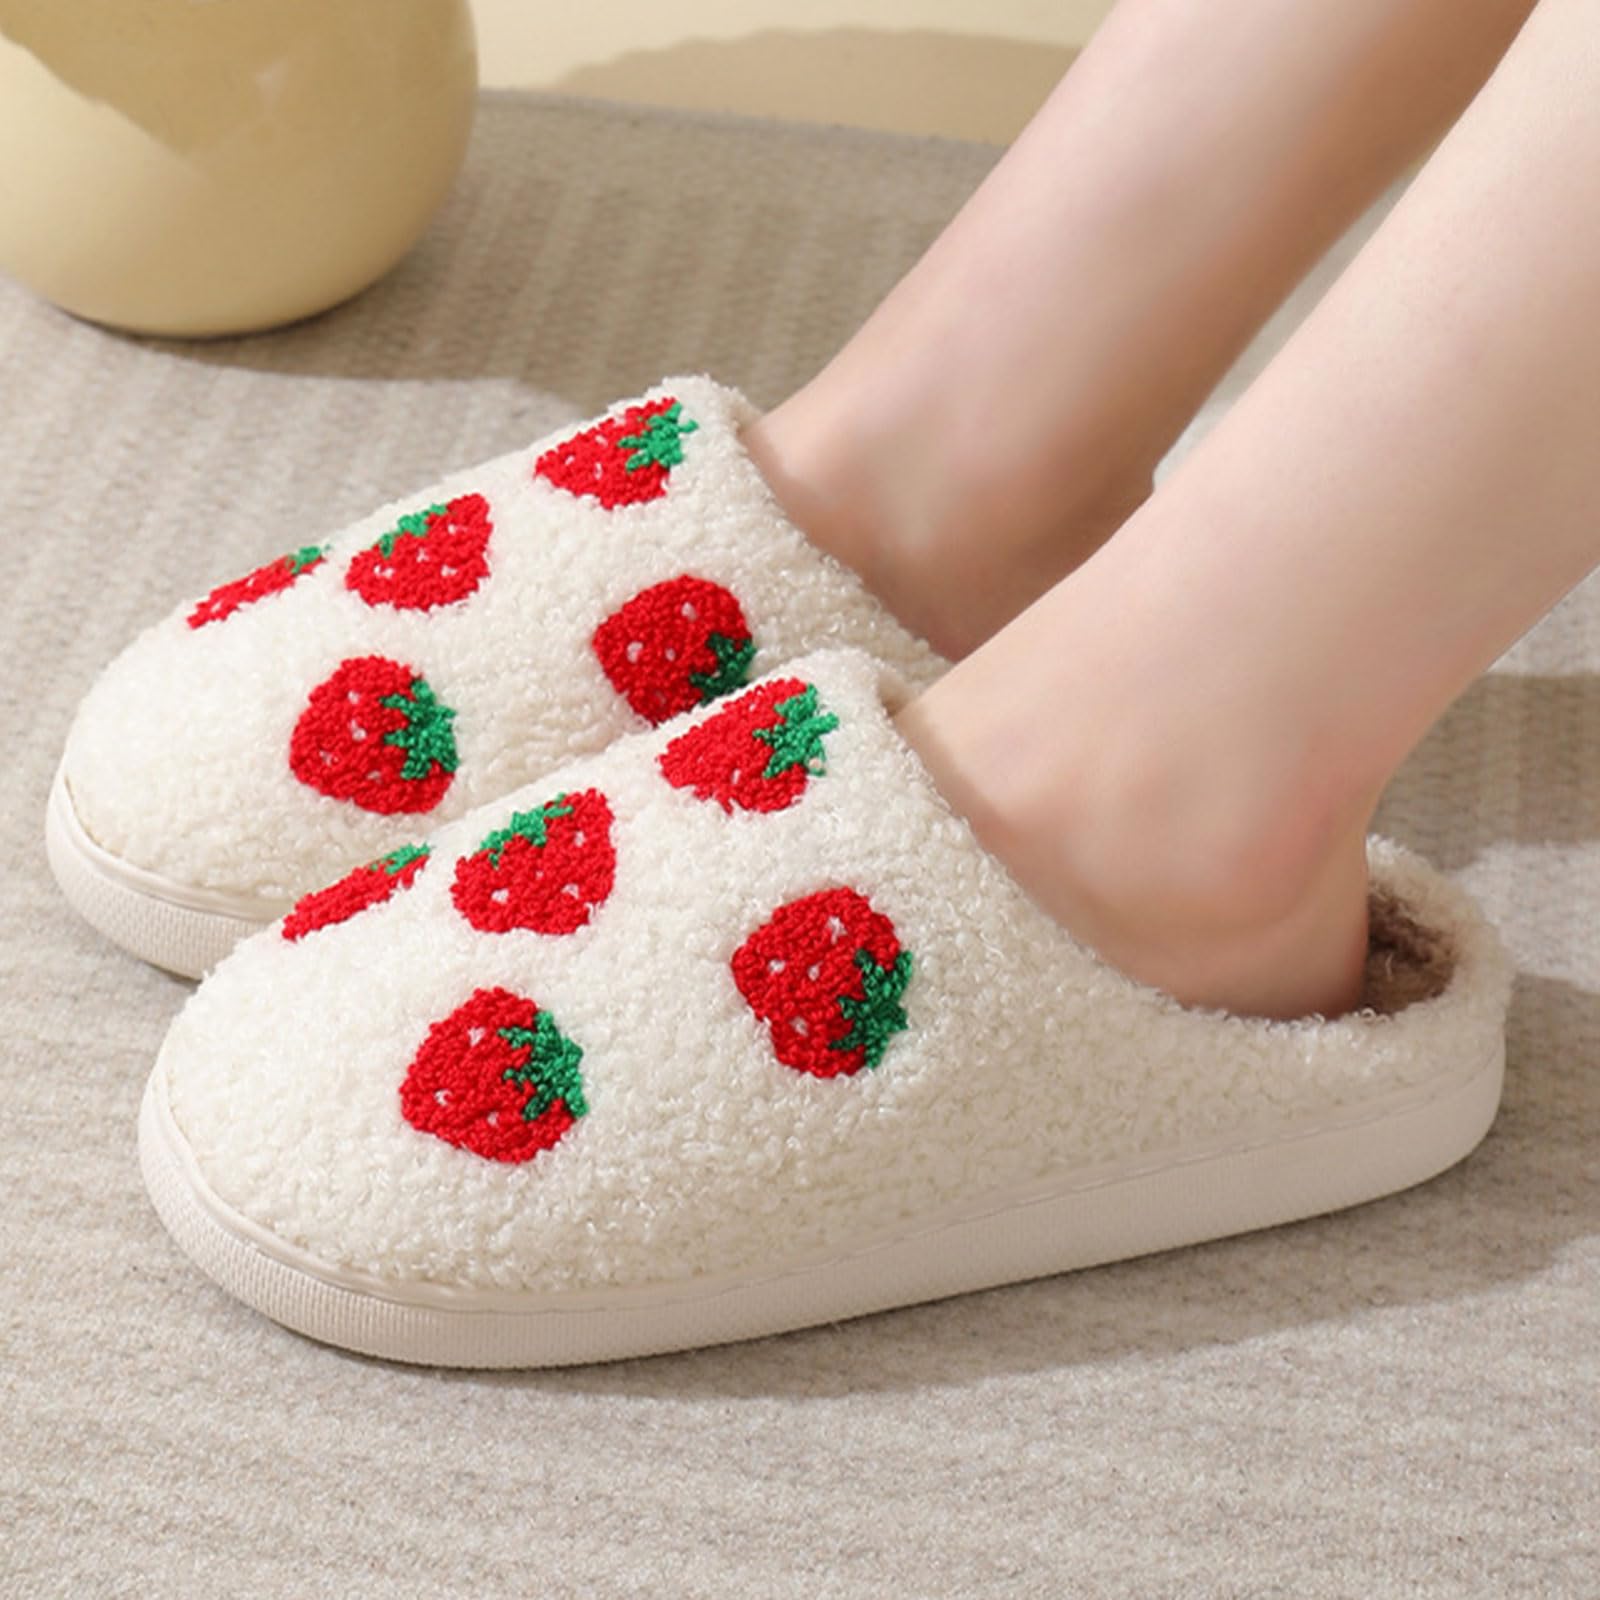 V OPXIN Meet Me At Midnight Slippers for Womens Mens Cute Slippers Cozy Plush Fuzzy Cushion Fluffy Soft Warm Slip-on House Slippers for Indoor and Outdoor Strawberry Mushroom Evil Eyes Slippers